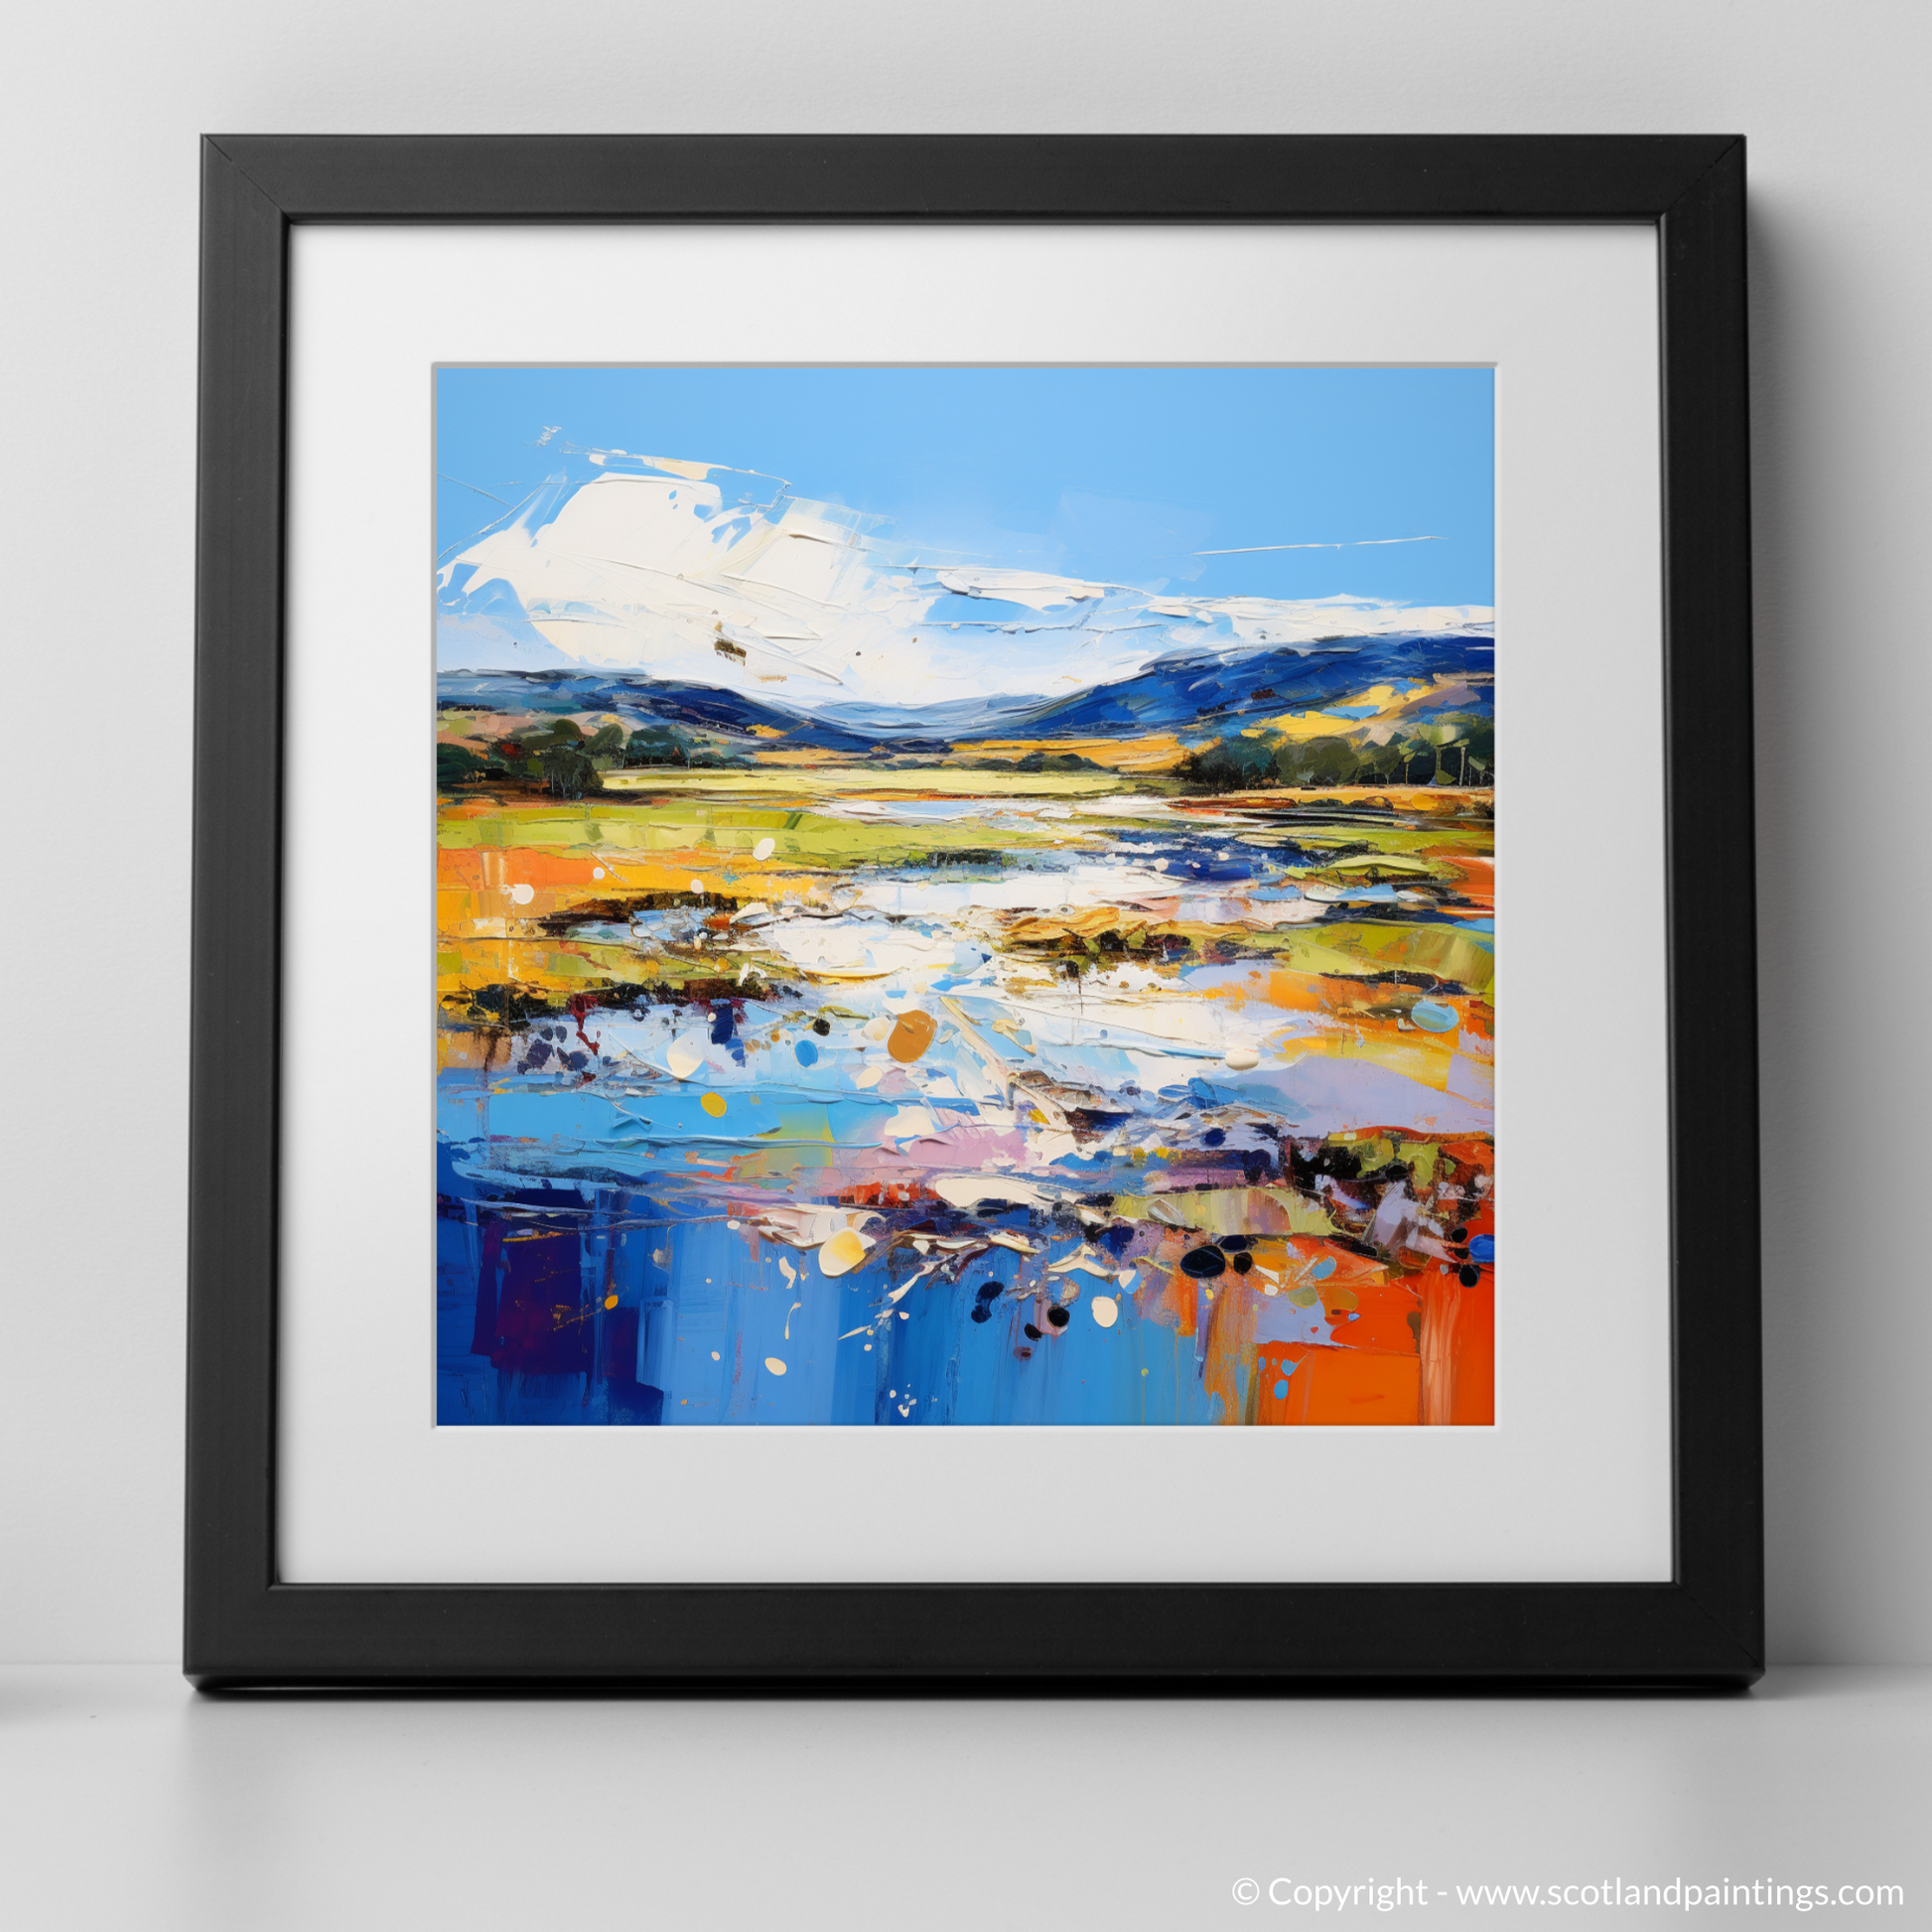 Art Print of Loch Doon, Ayrshire in summer with a black frame